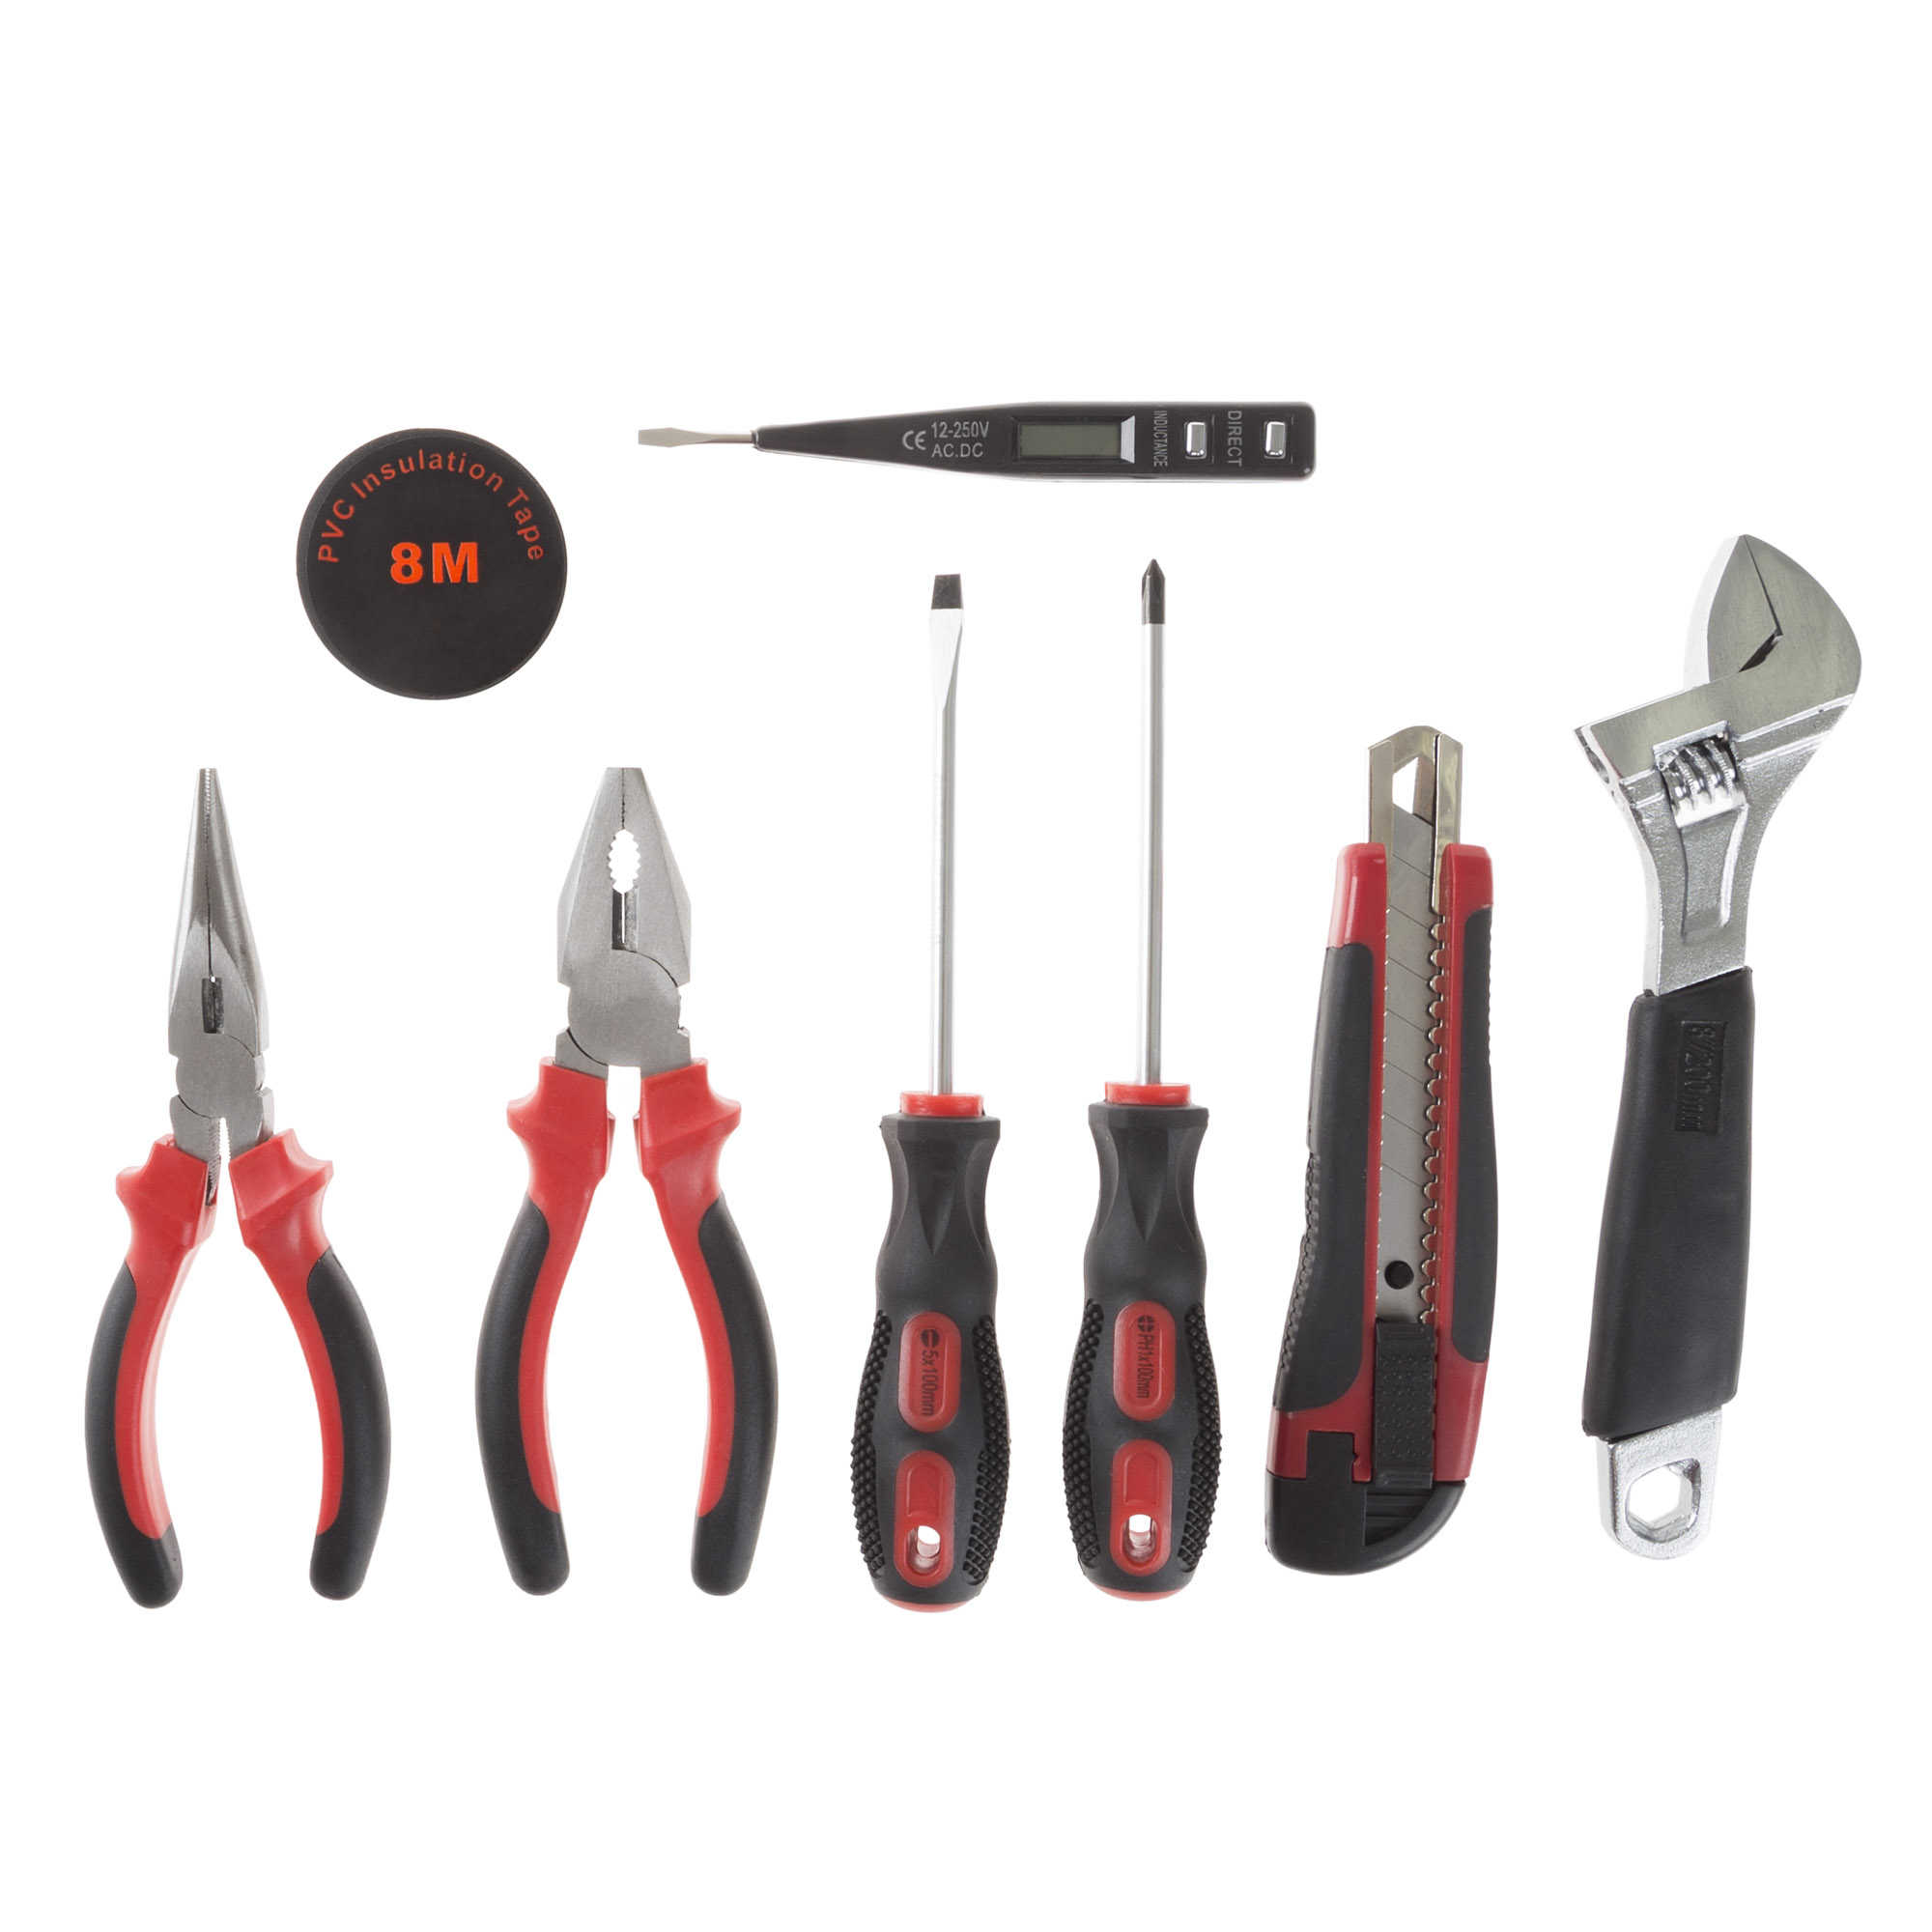 Household Hand Tools, Tool Set - 9 Piece by Stalwart, Set Includes â Adjustable Wrench, Screwdriver, Pliers (Tool Kit for the Home, Office, or Car)